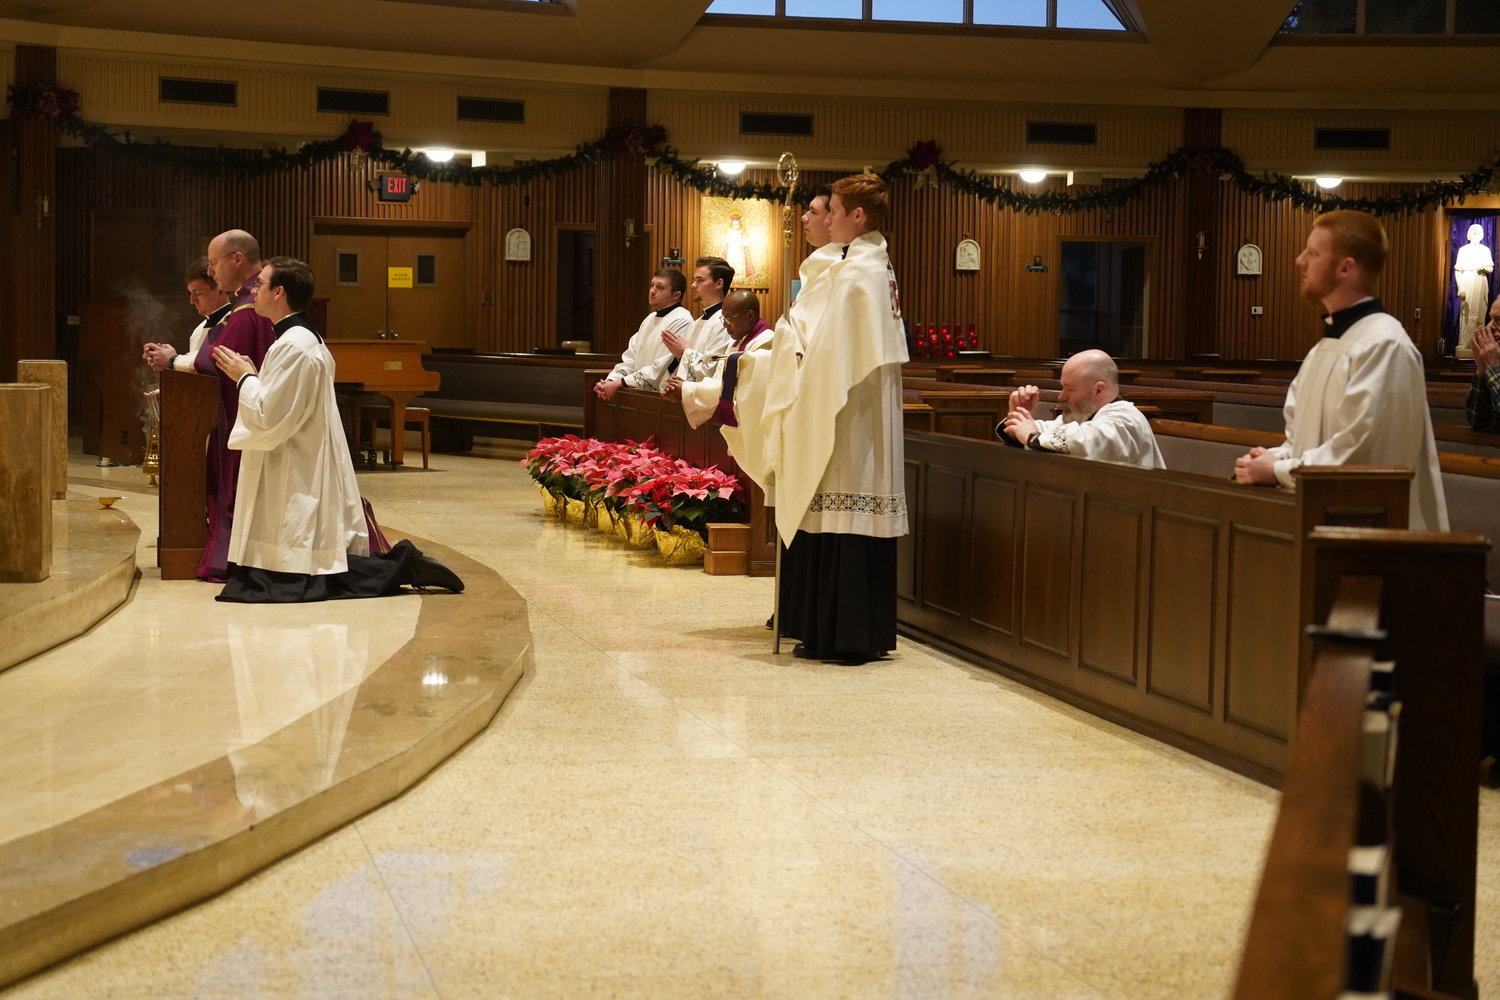 Bishop W. Shawn McKnight joins the seminarians of the Jefferson City diocese in Adoration before the Most Blessed Sacrament during Evening Prayer and a Holy Hour for Vocations in the diocese, on Dec. 21 in the Cathedral of St. Joseph. Several priests and laypeople joined them.